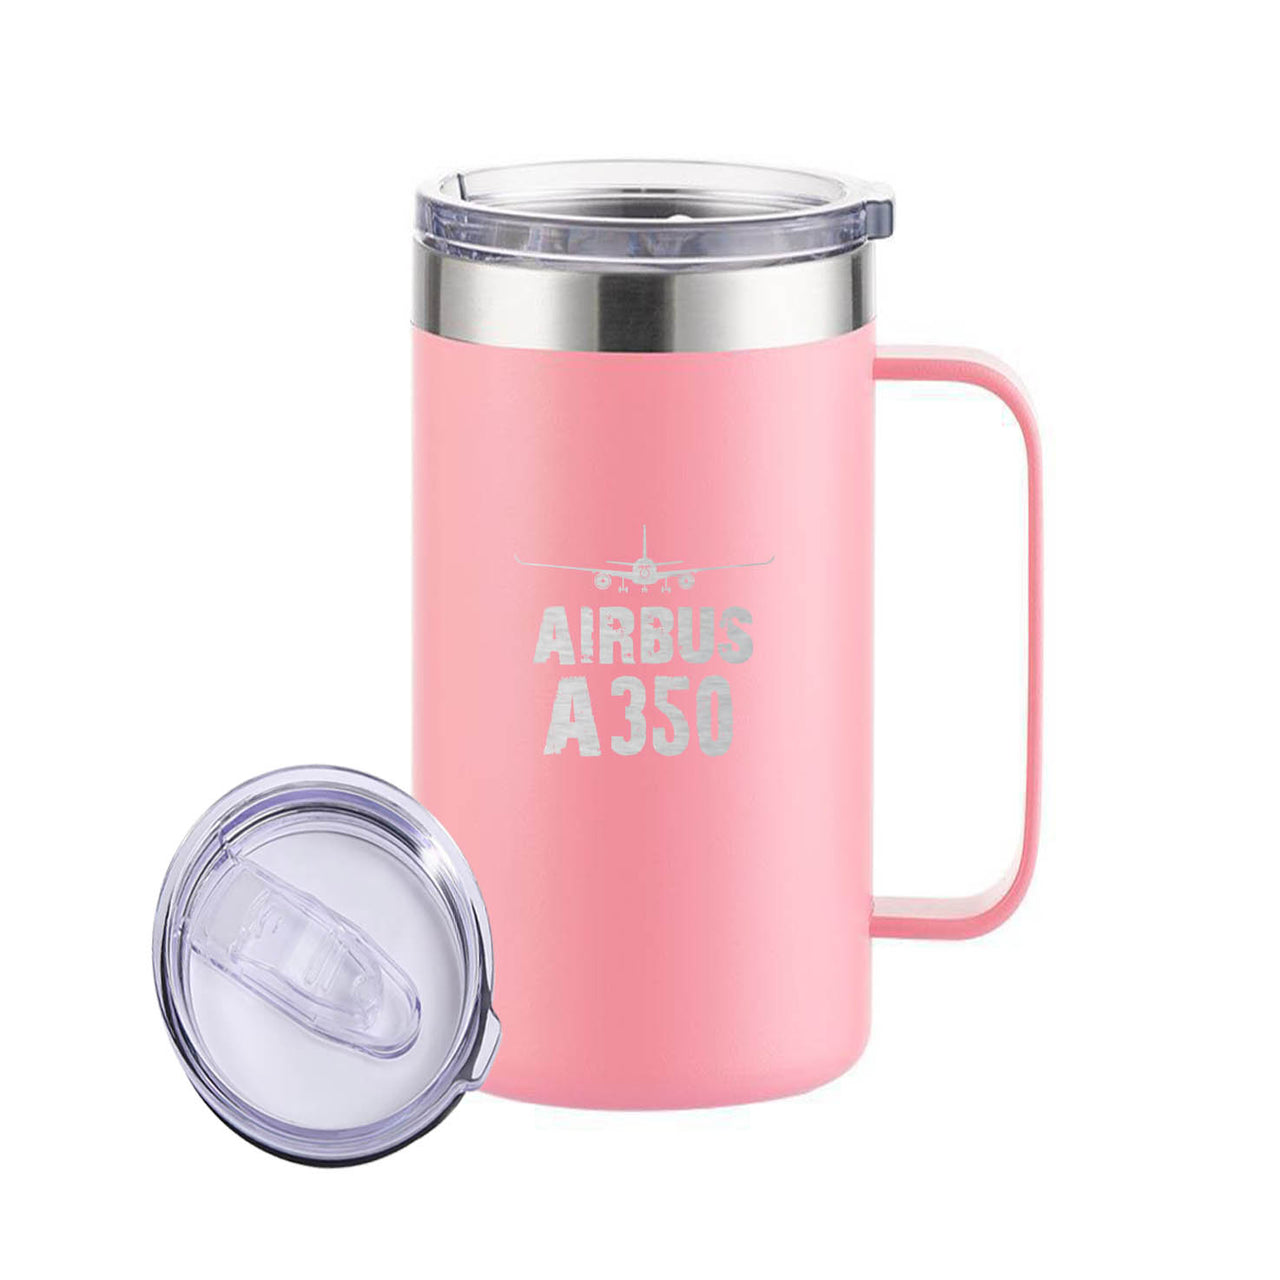 Airbus A350 & Plane Designed Stainless Steel Beer Mugs